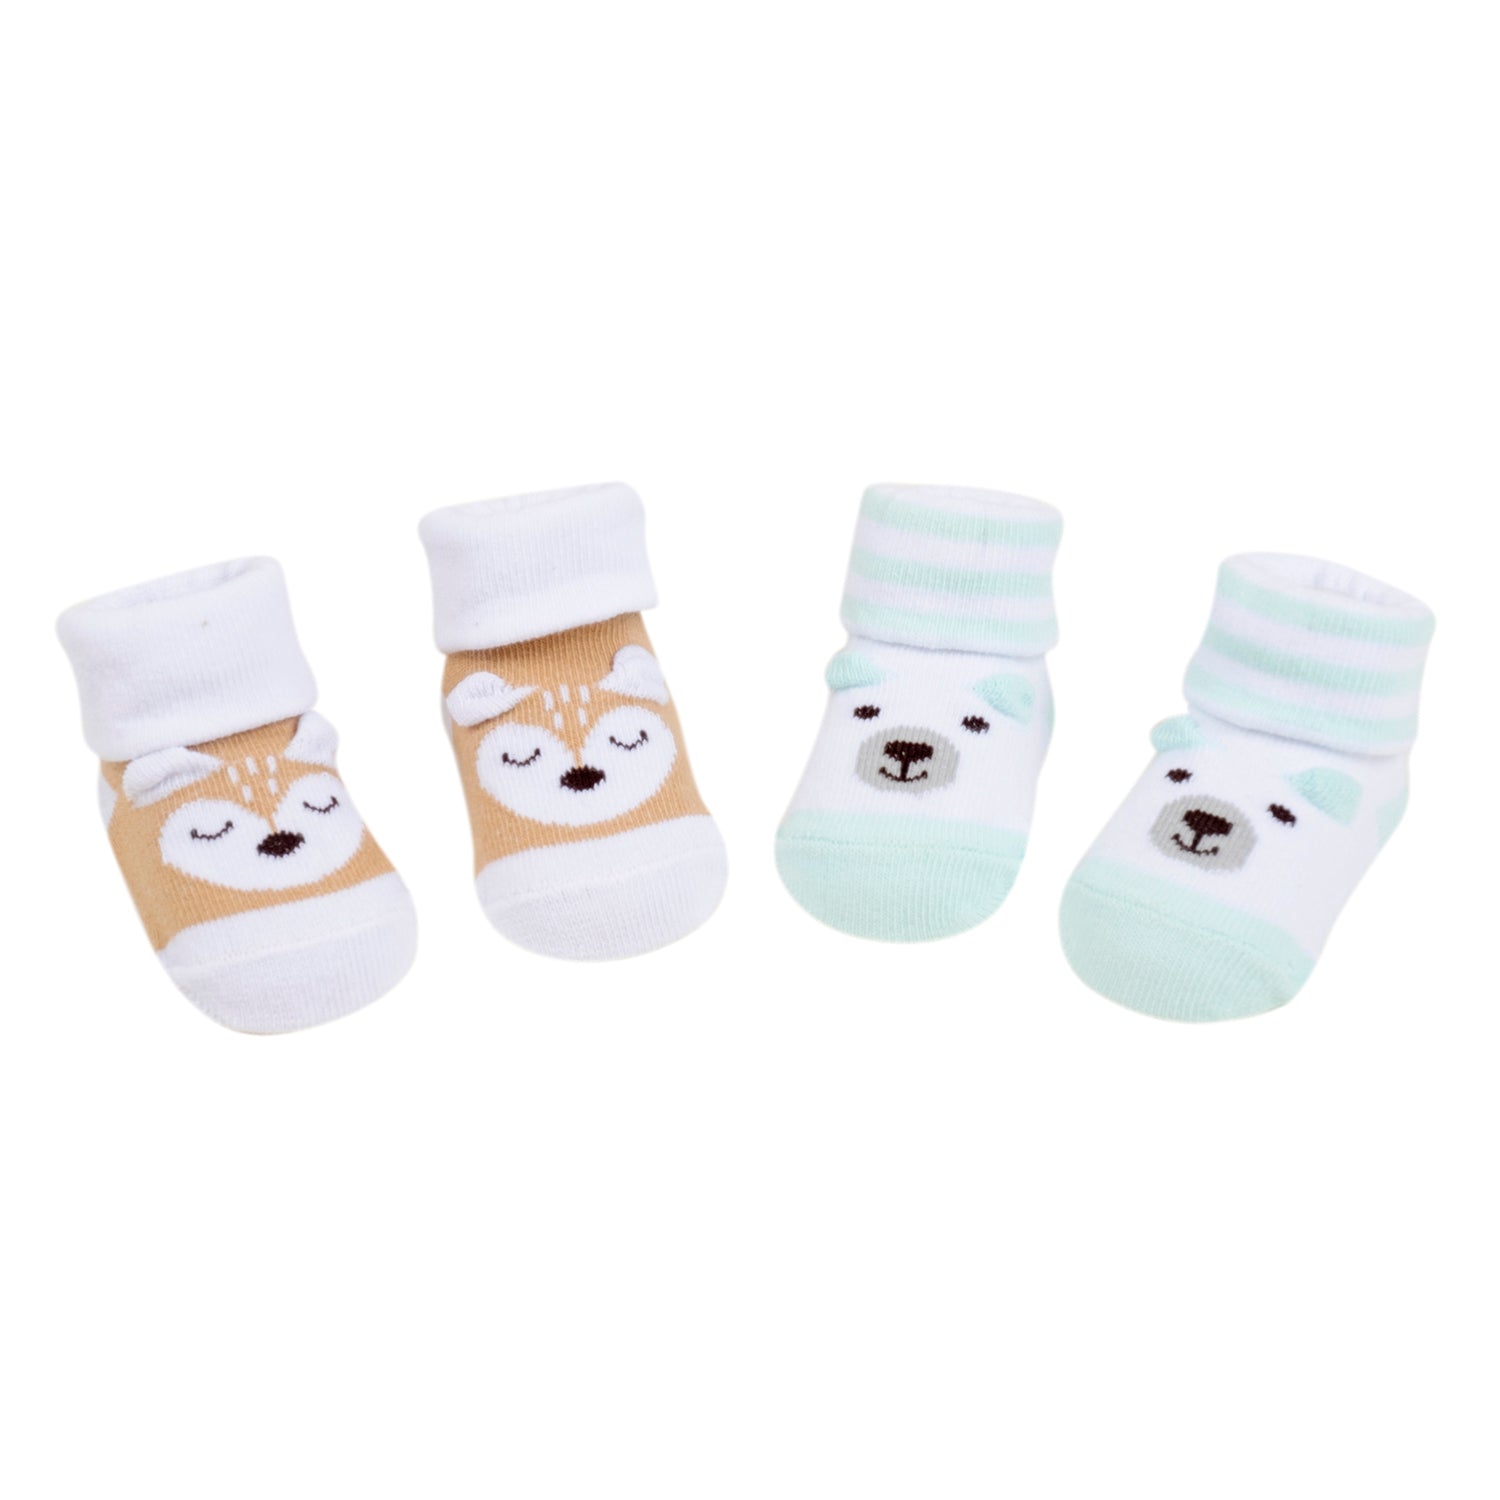 Baby Moo 3D Fox Bear Cotton Ankle Length Infant Dress Up Walking Set of 2 Socks Booties - Turquoise